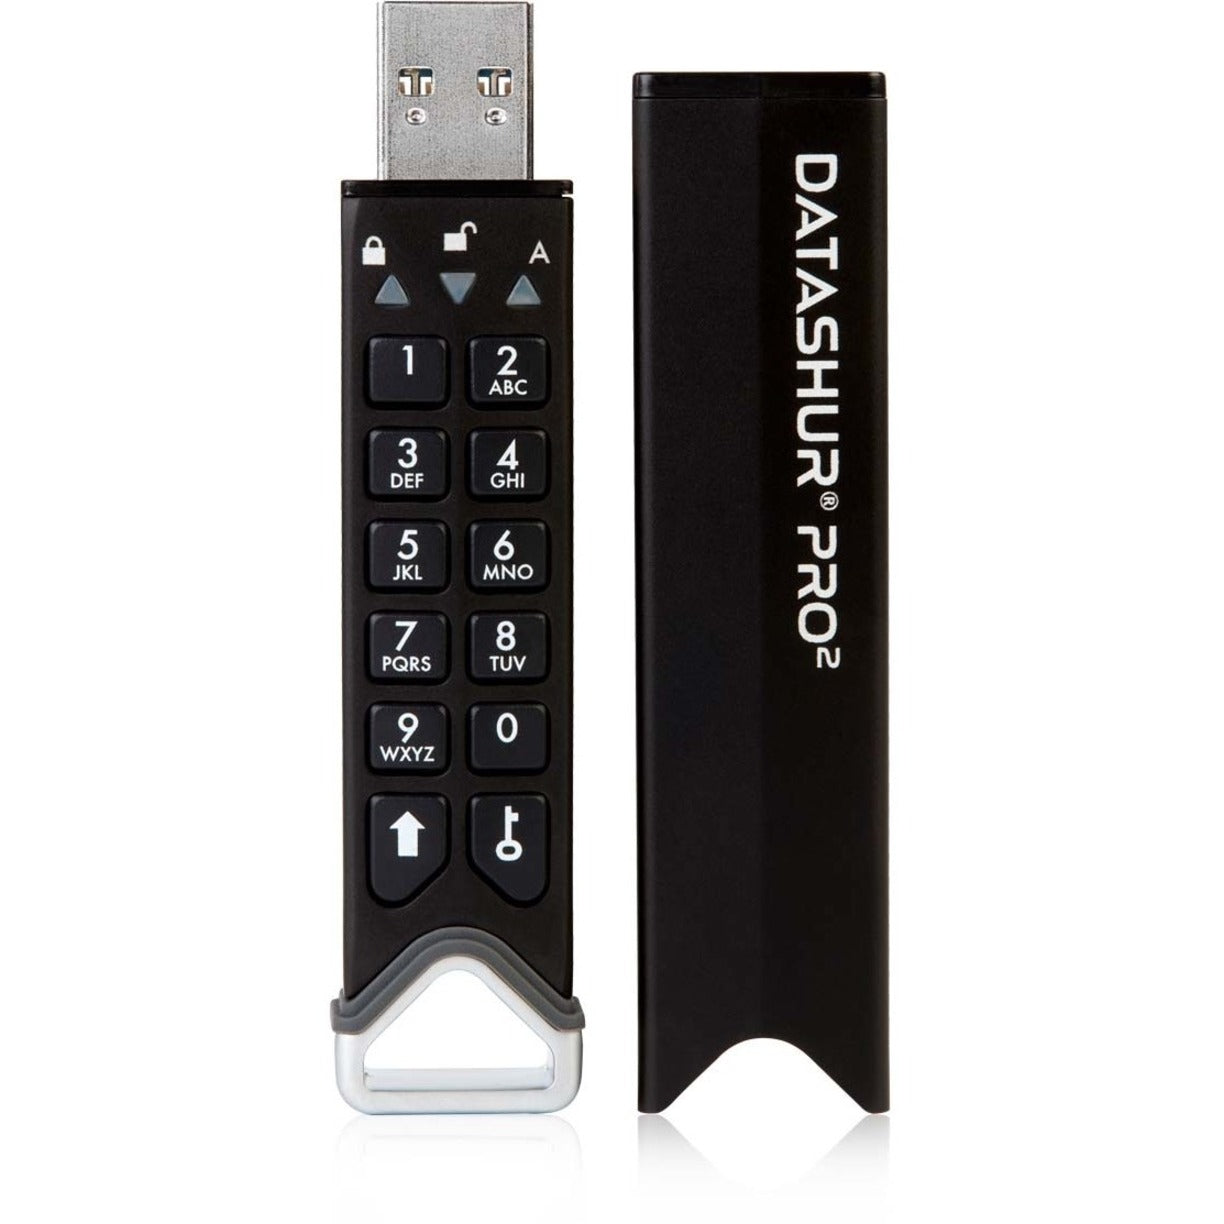 iStorage IS-FL-DP2-256-128 datAshur PRO² 128GB USB 3.2 (Gen 1) Type A Flash Drive, Wear Resistant, Key Ring, Password Protection, Water Resistant, Dust Resistant, Hardware Encryption